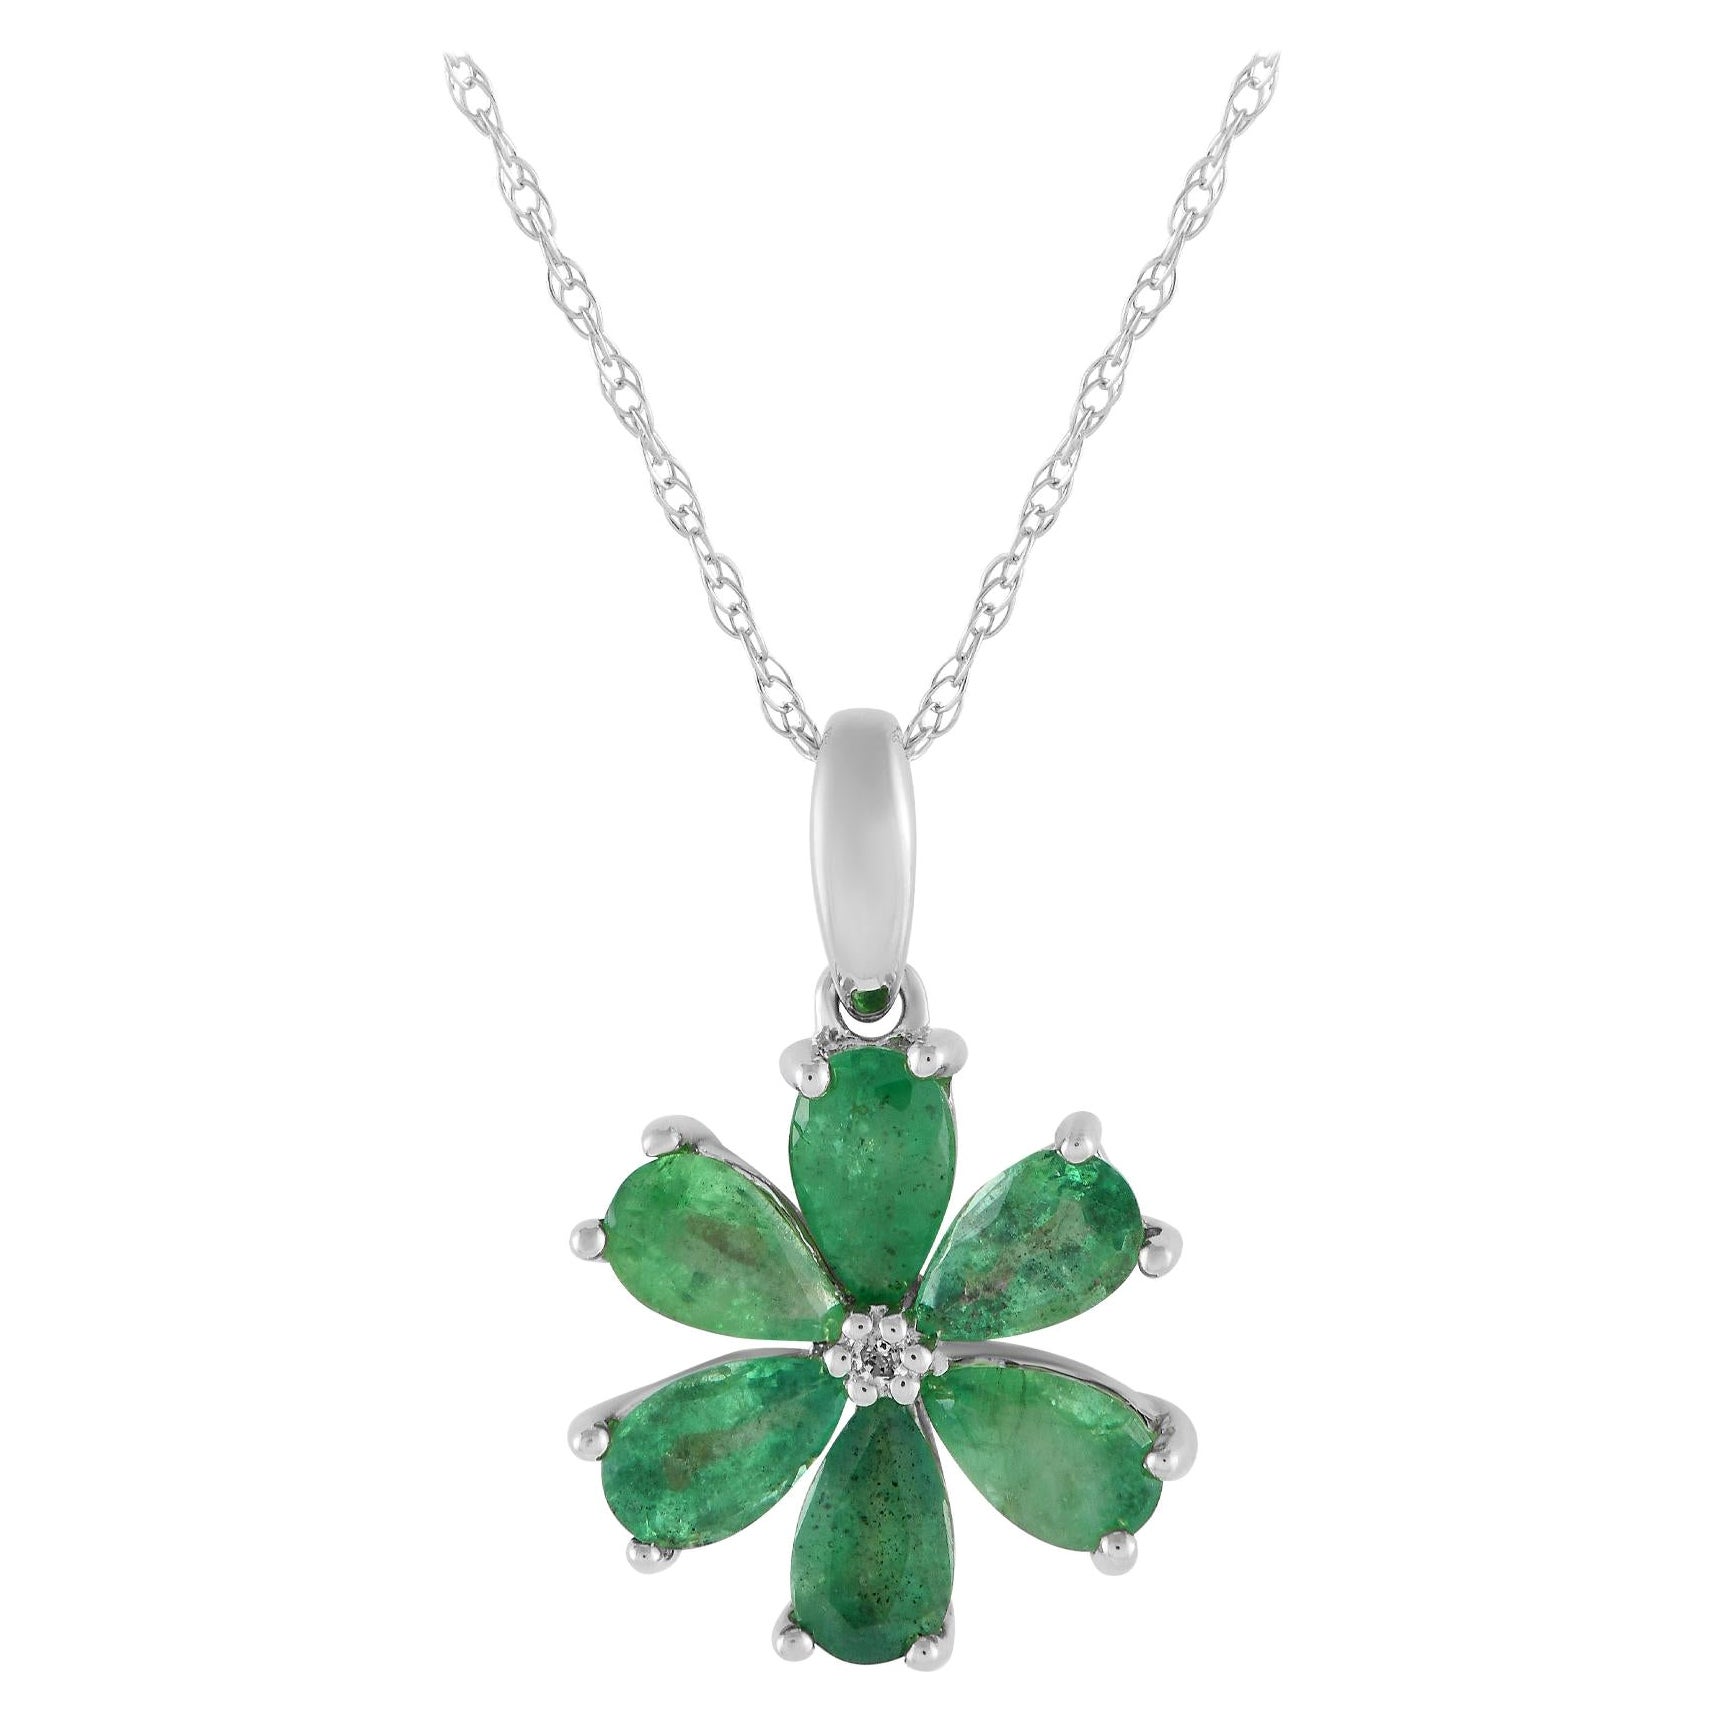 LB Exclusive 14K White Gold 0.01ct Diamond & Emerald Flower Necklace PS01-110723 For Sale